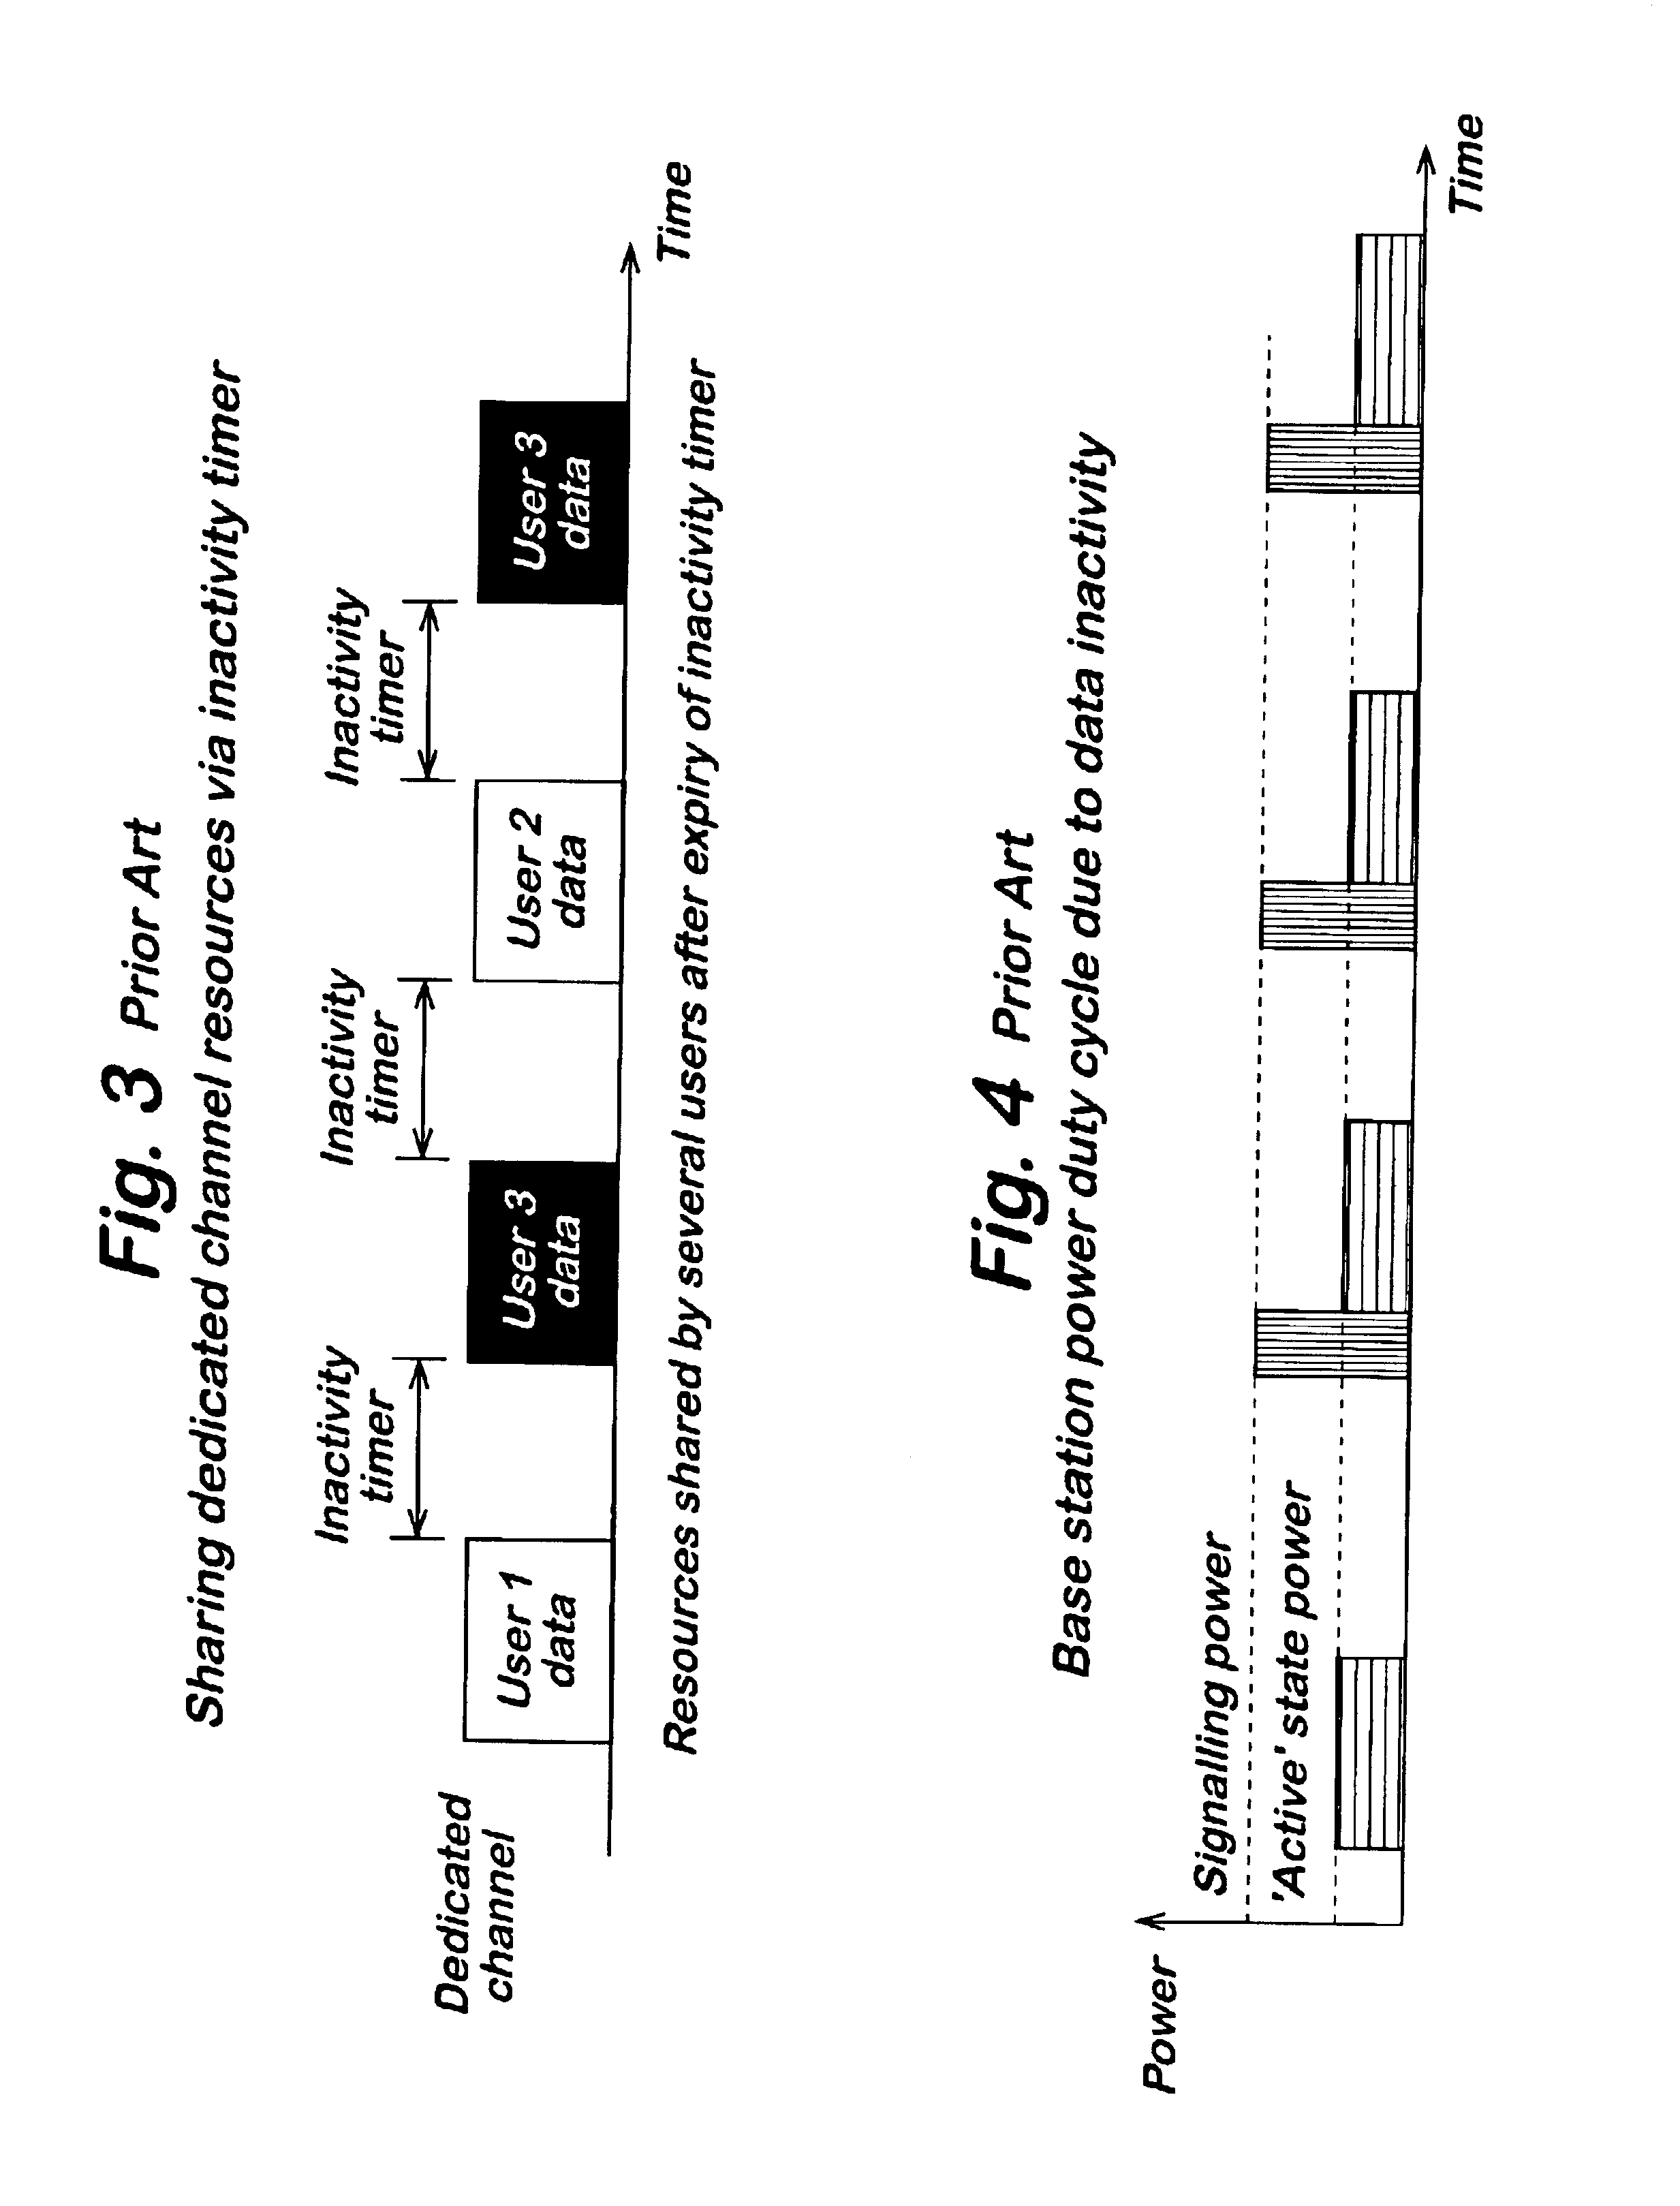 Method of selecting length of time of inactivity on a channel dedicated to a user terminal to be detected for the channel to be released, and a corresponding network for radio telecommunications